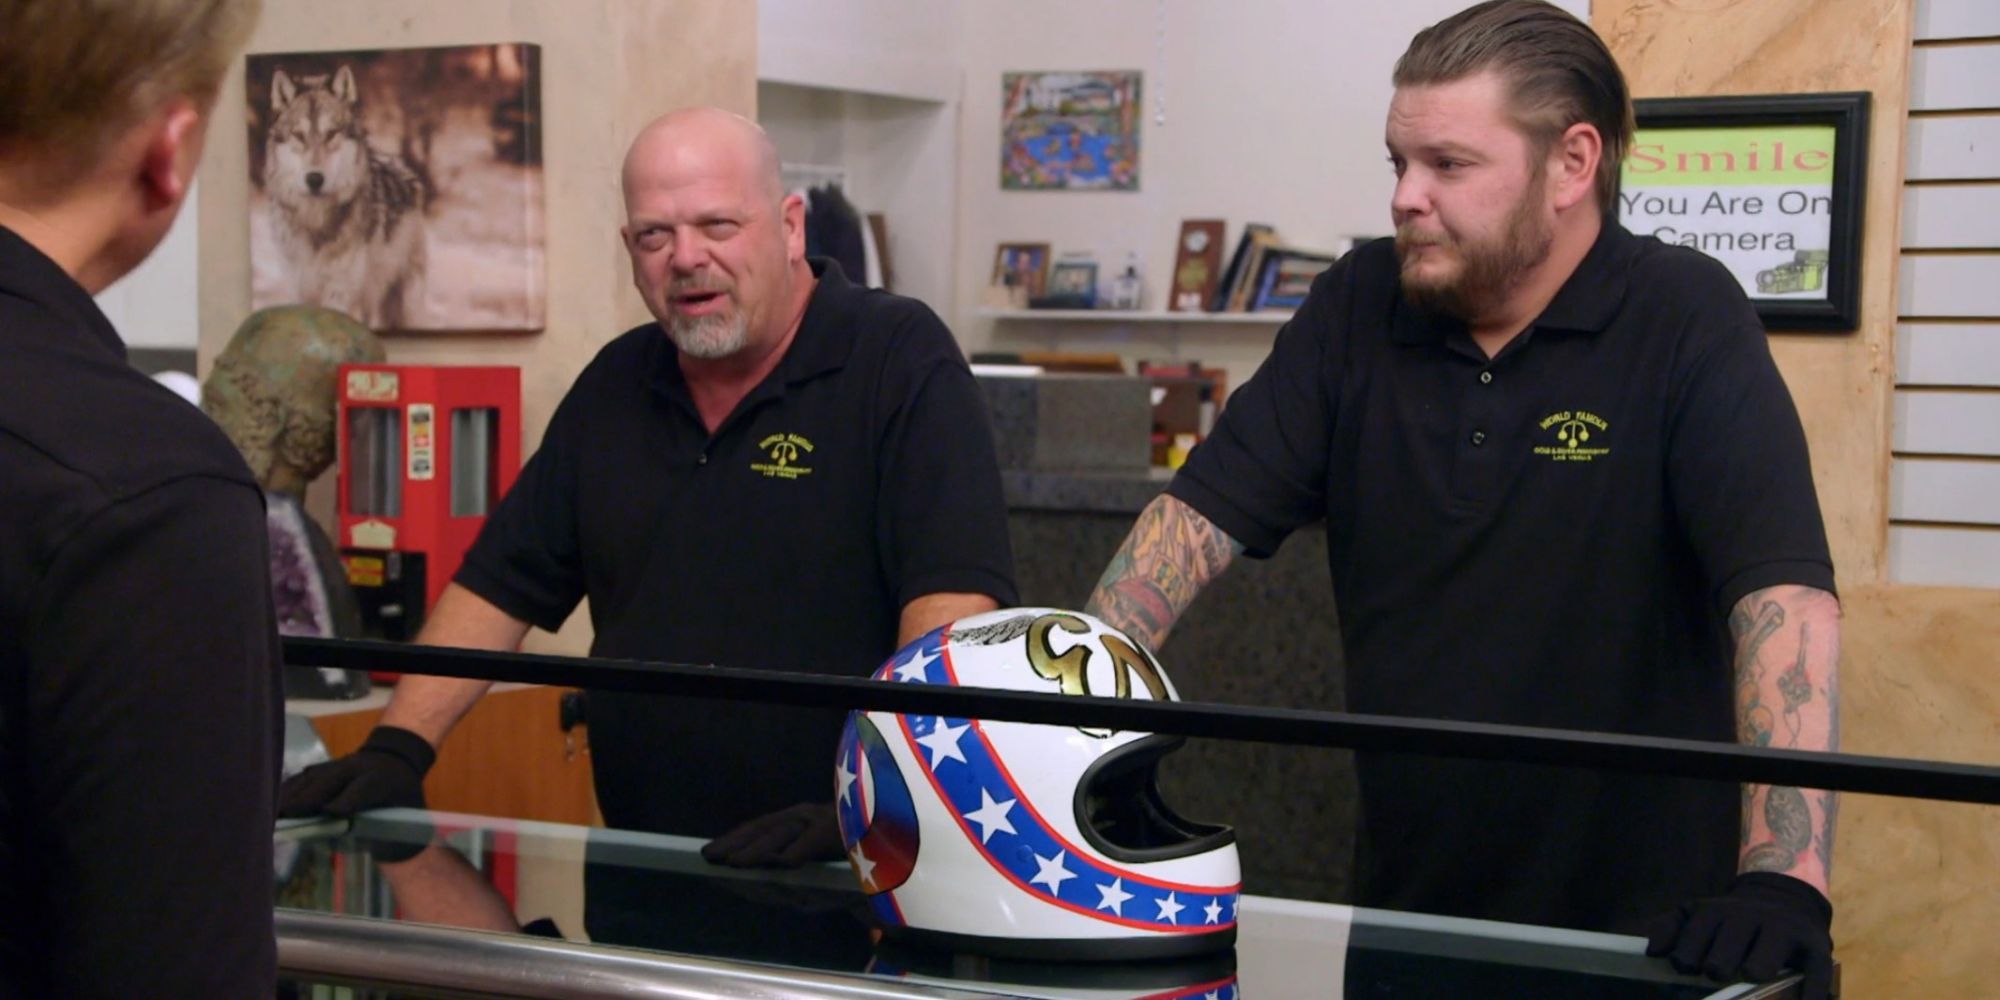 Pawn stars cast talking with customer about an item